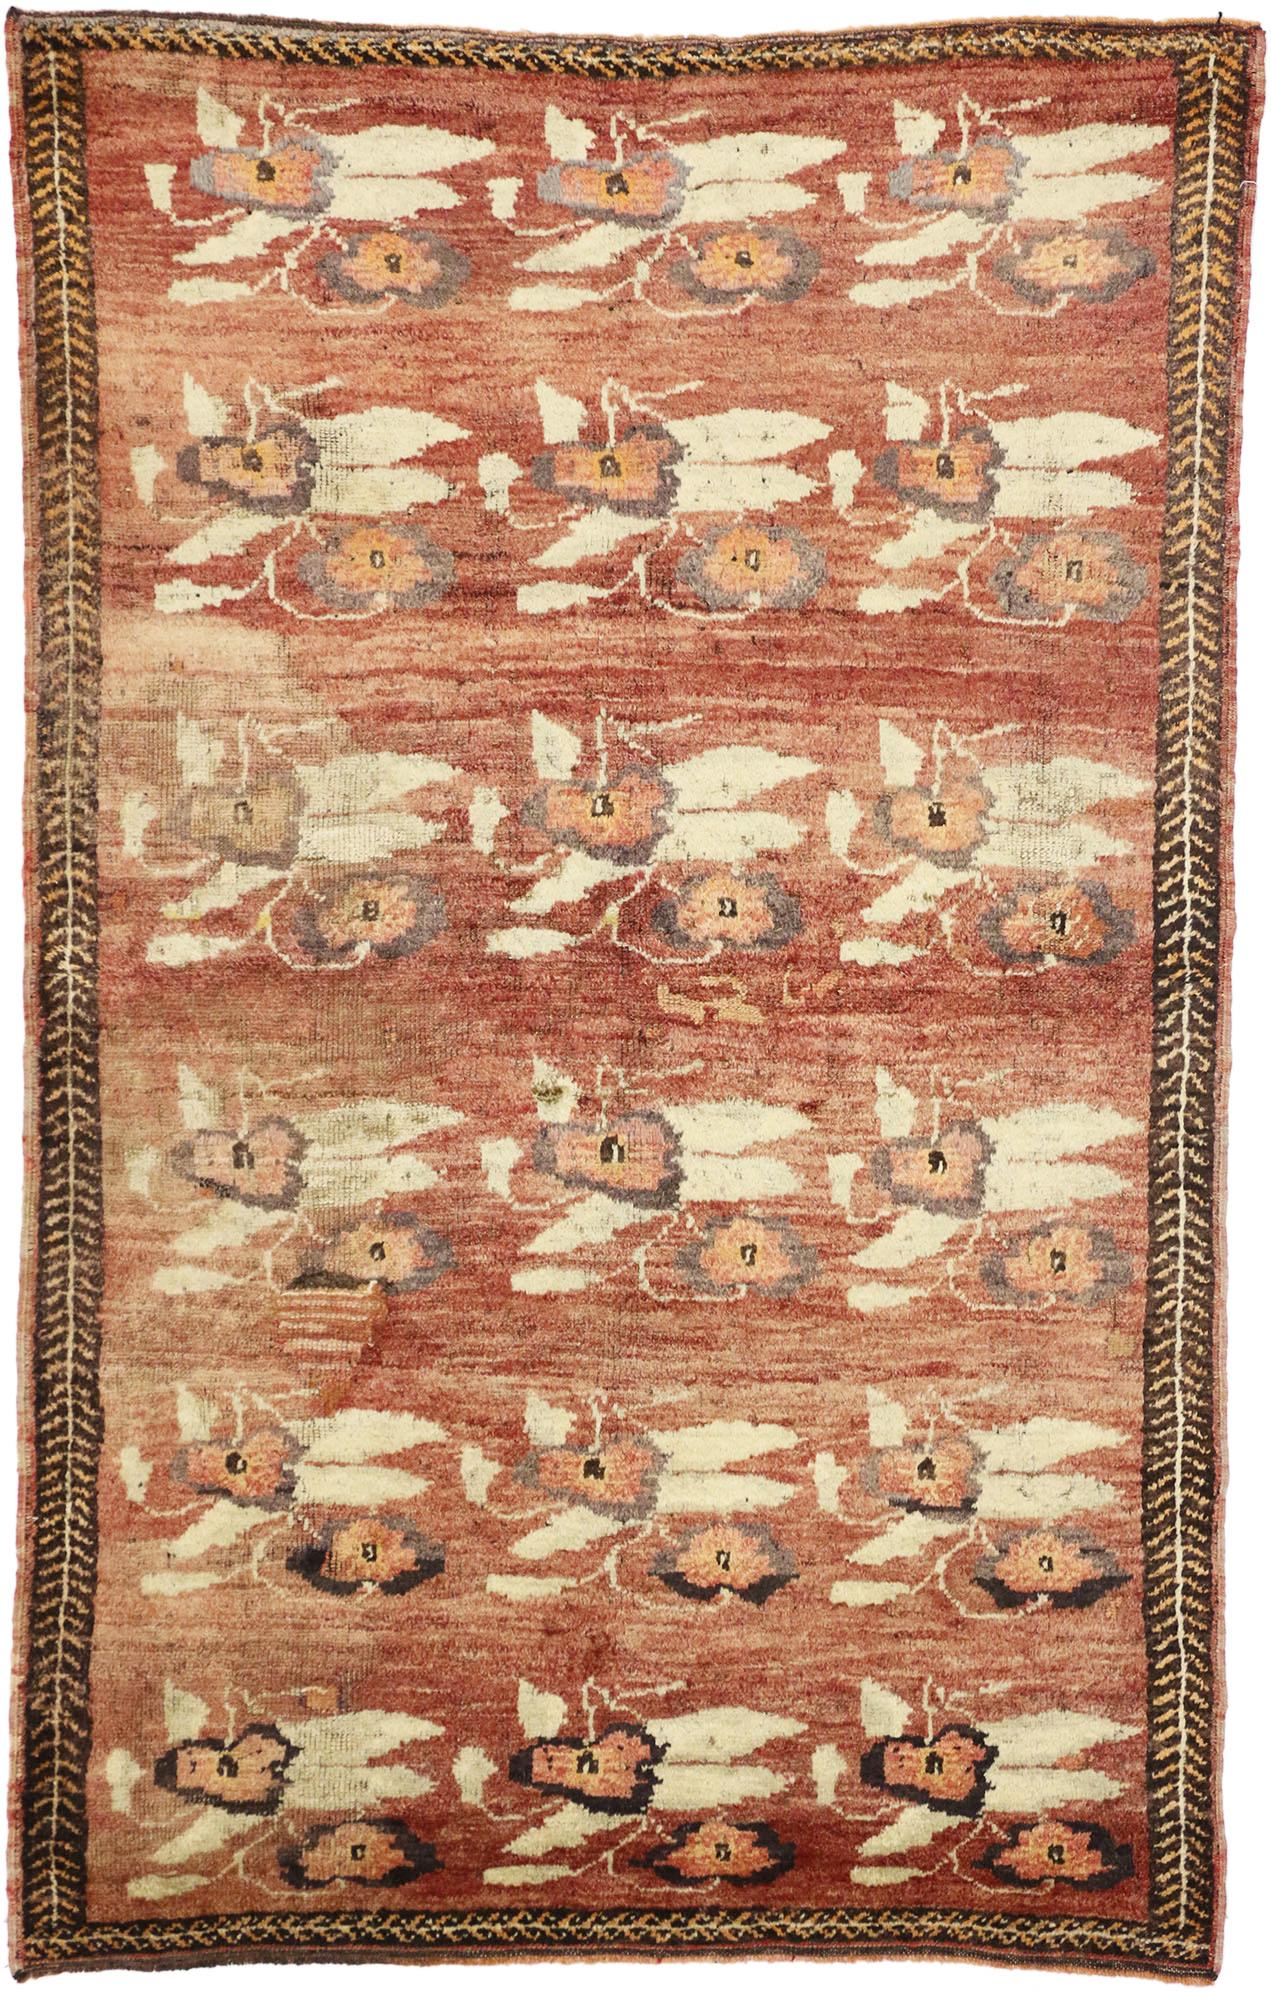 Wool Vintage Turkish Oushak Rug with Rustic Earth-Tone Colors For Sale